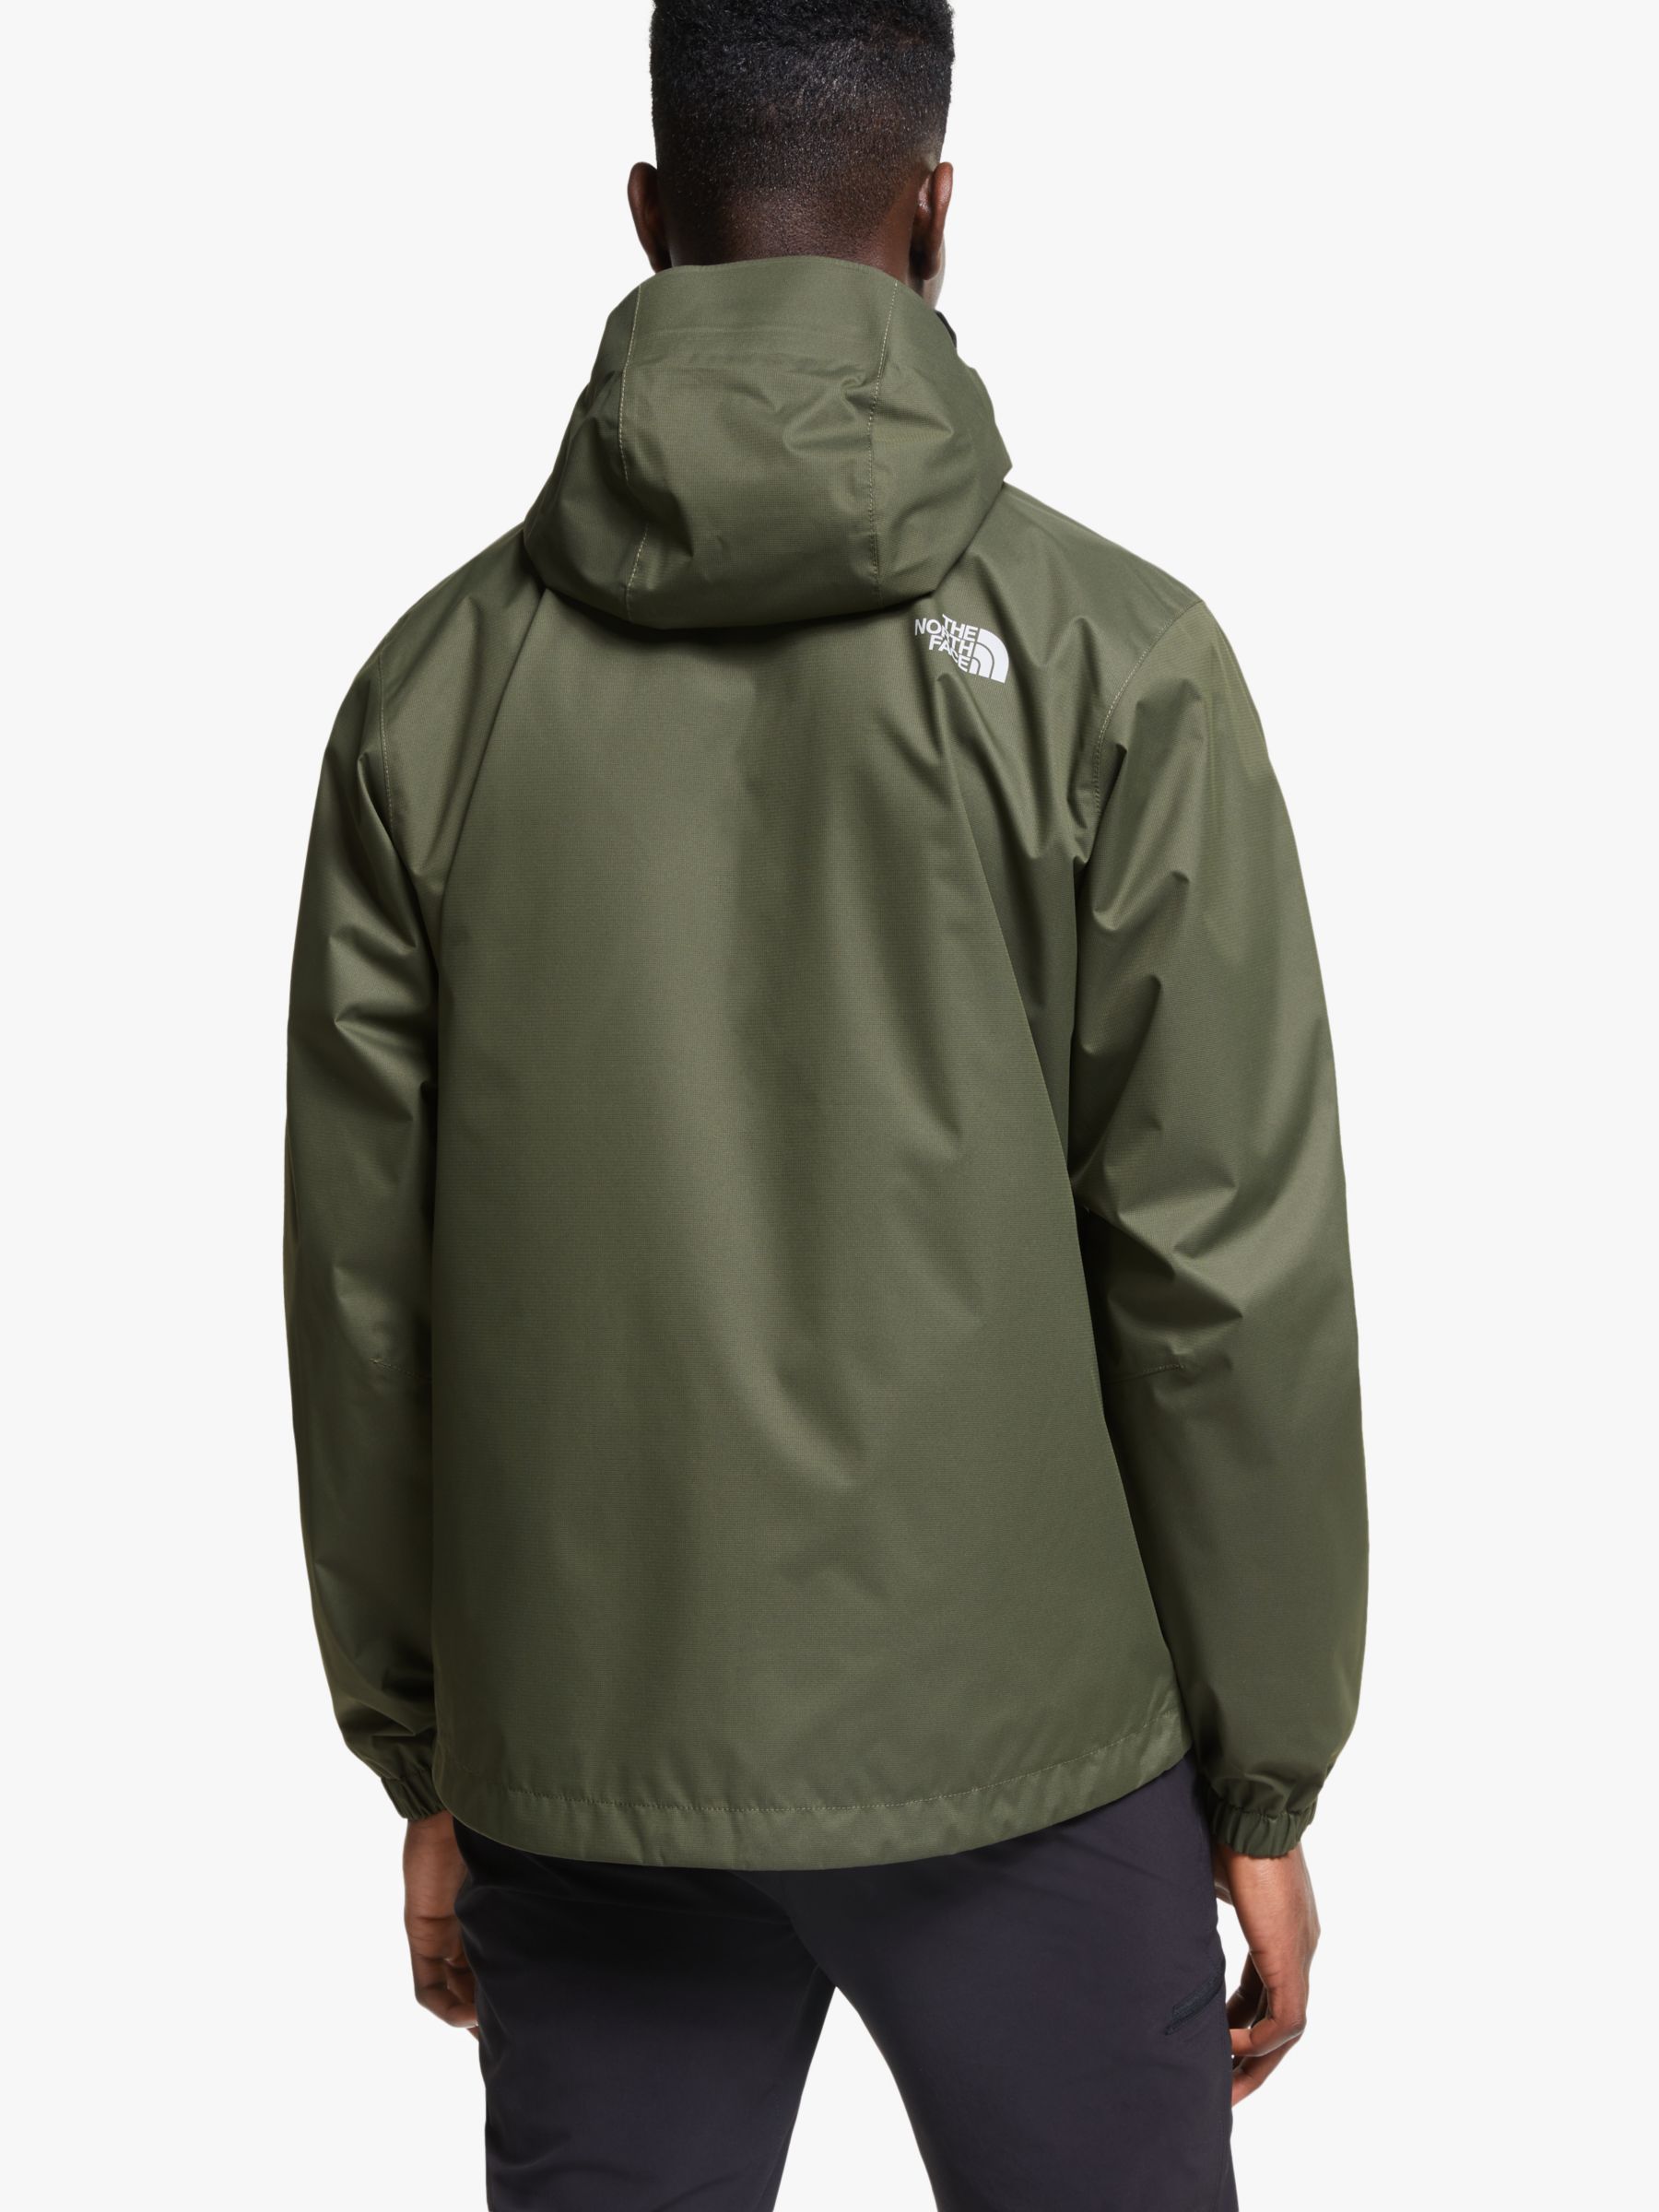 taupe green north face jacket